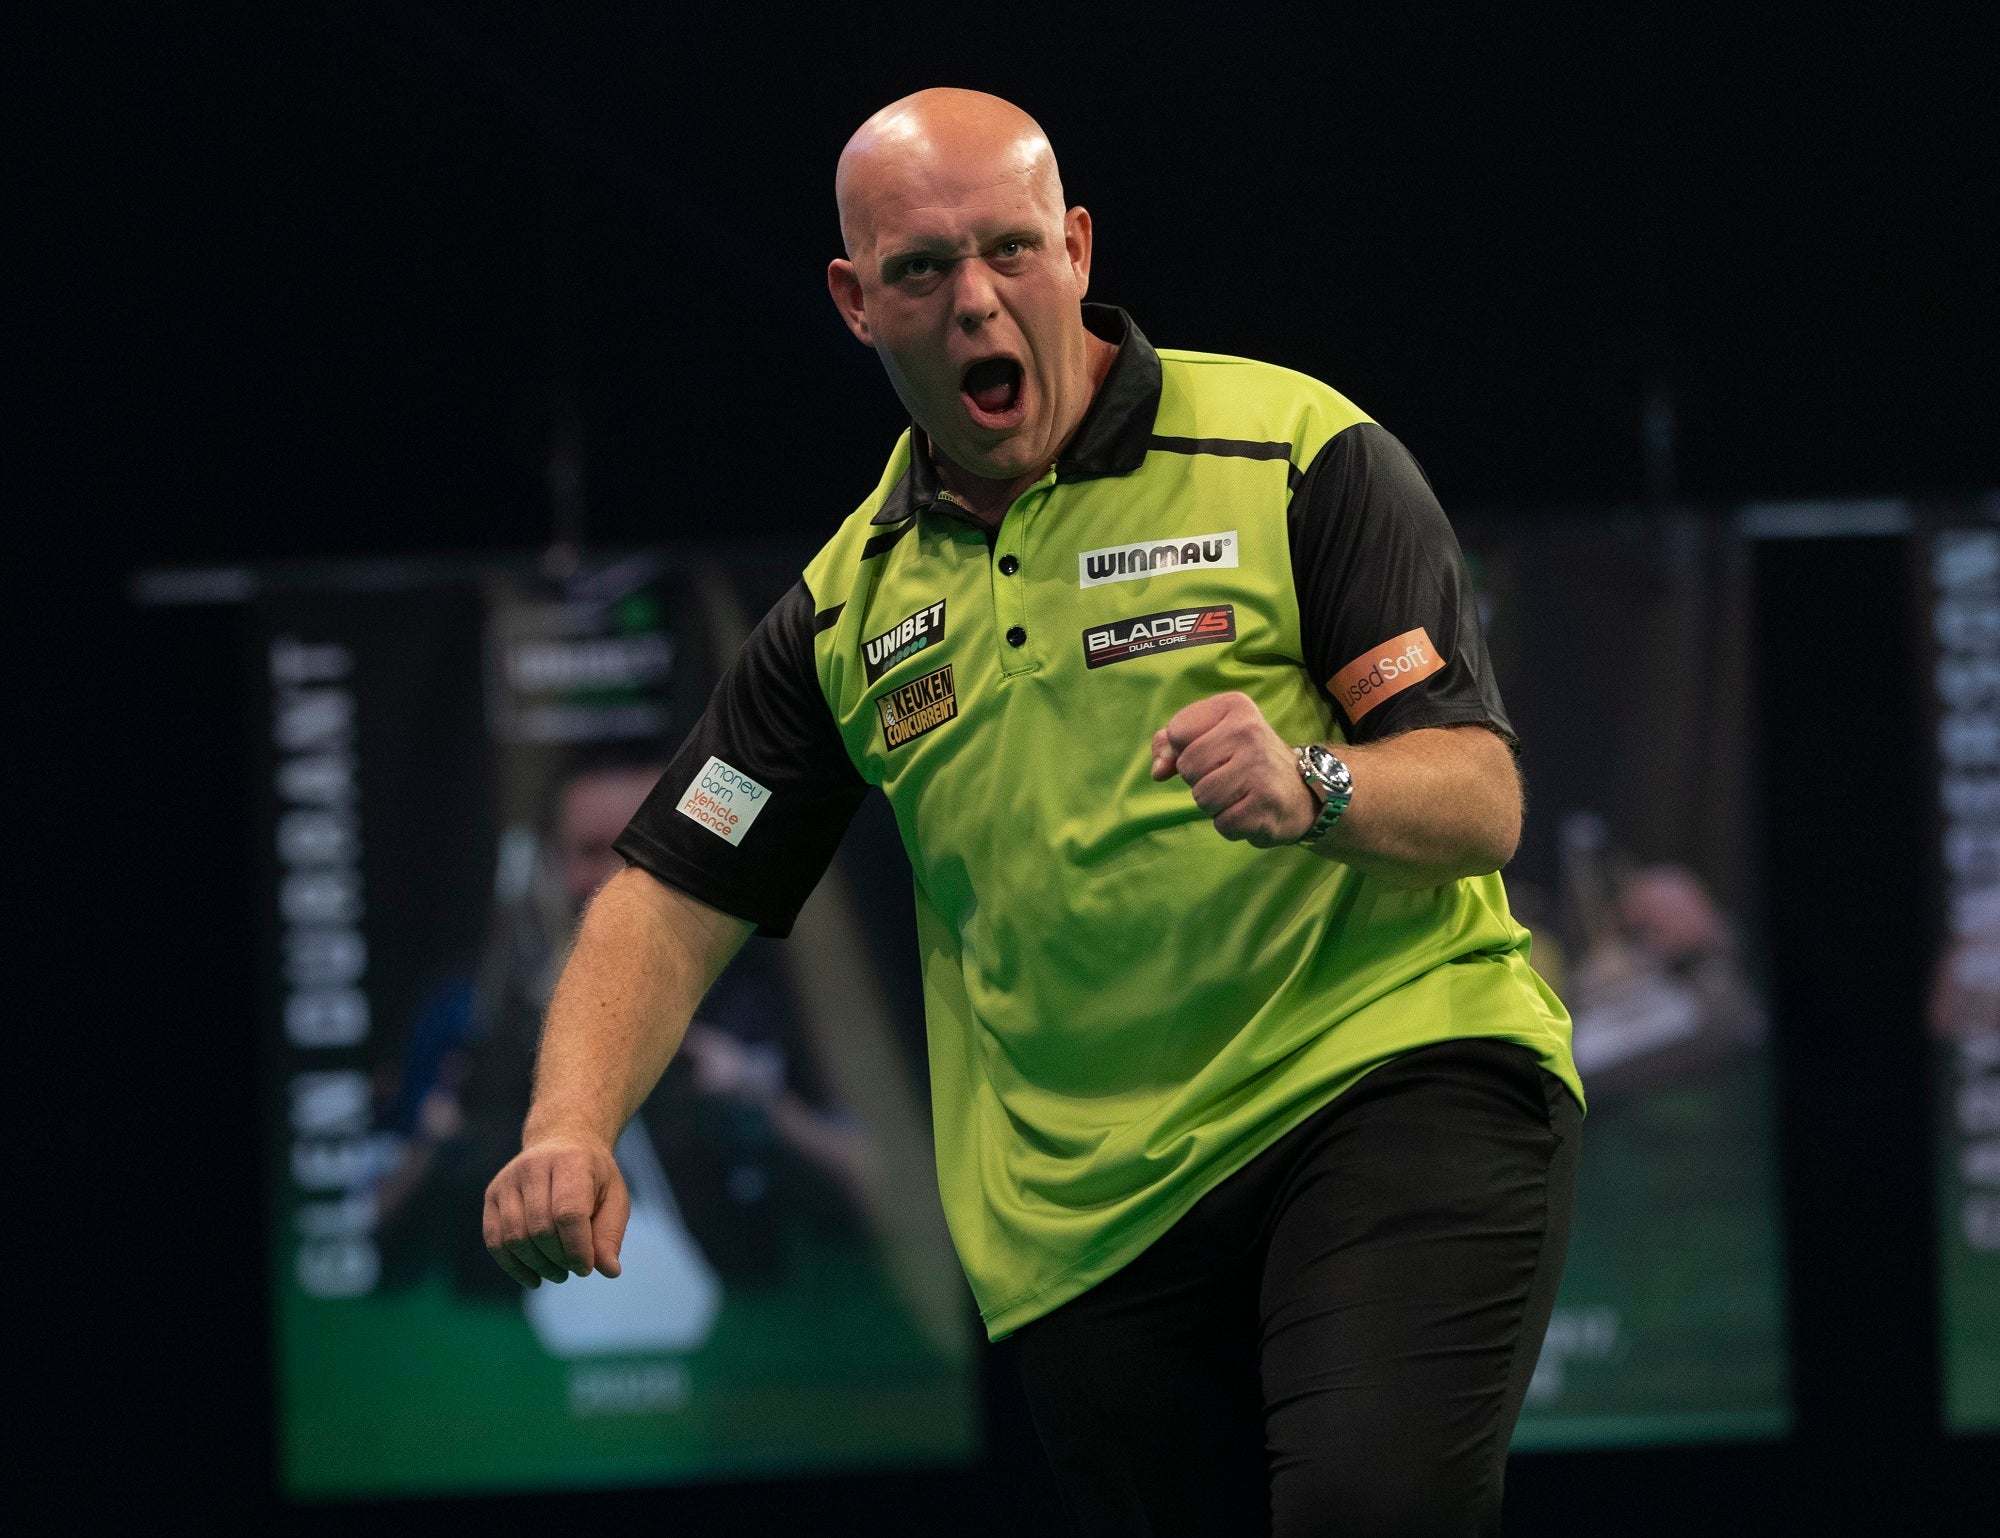 Five 'most unbreakable' records in darts explored